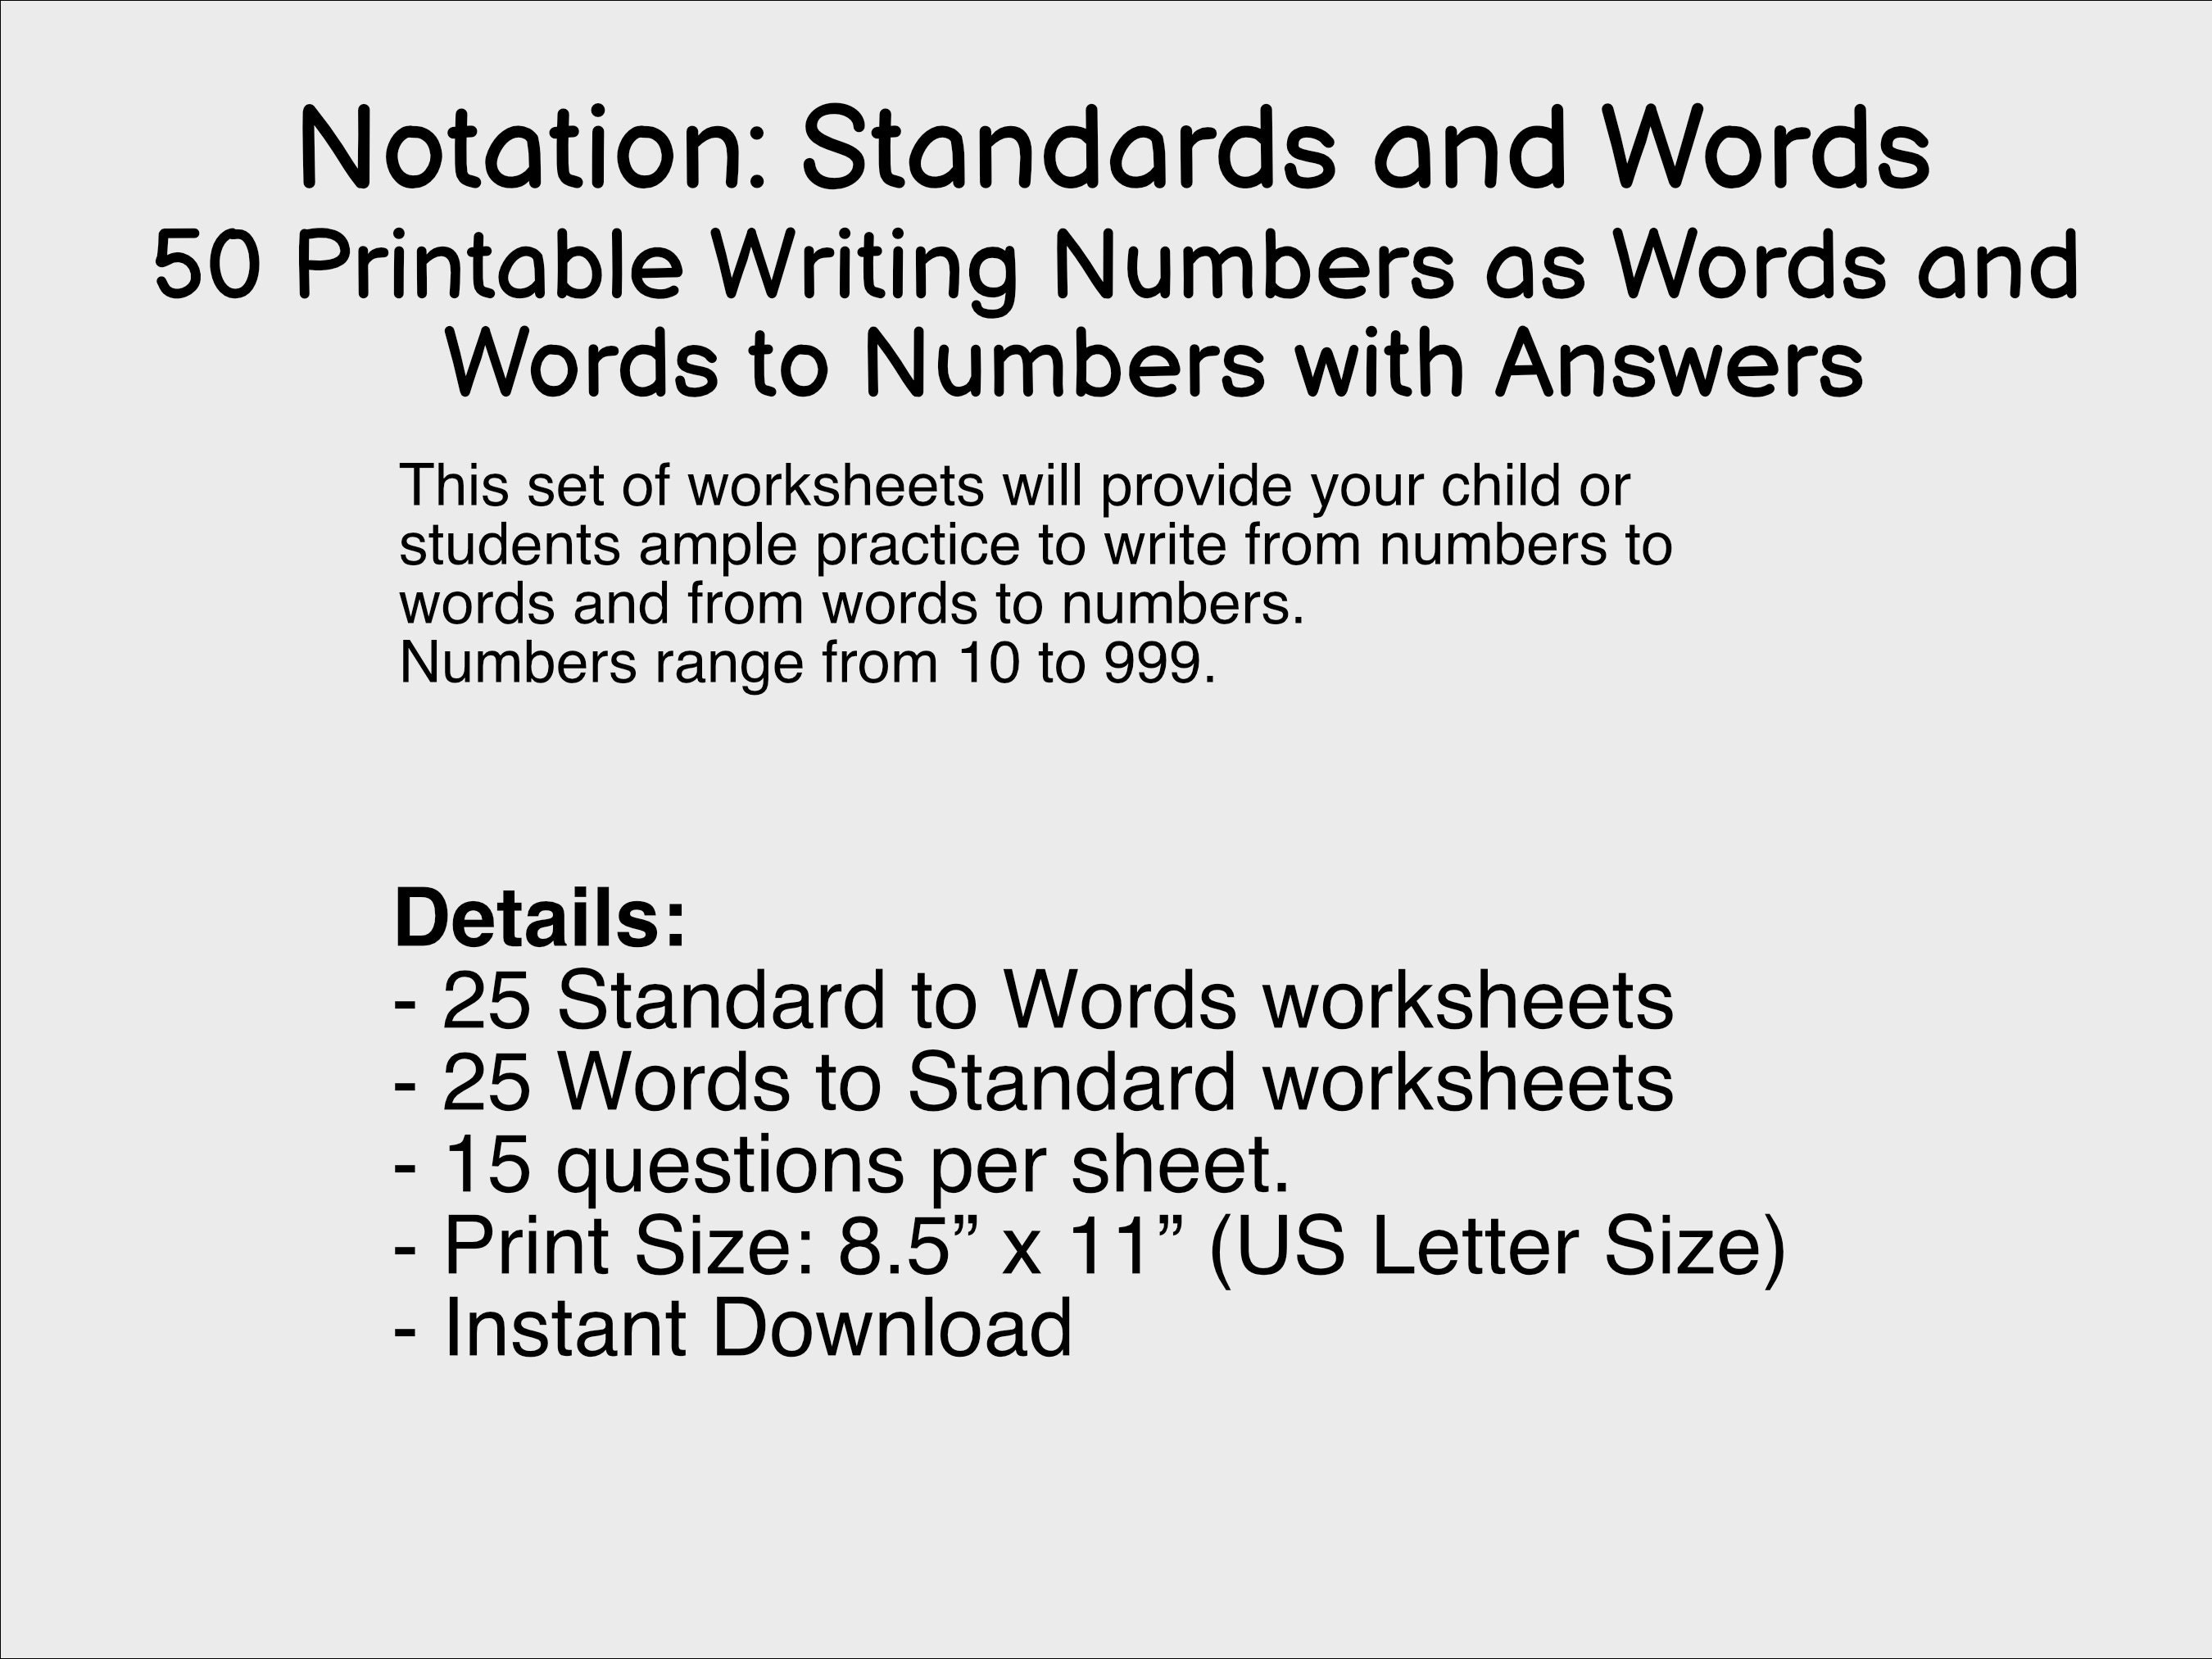 math-worksheet-standard-and-words-notation-writing-numbers-etsy